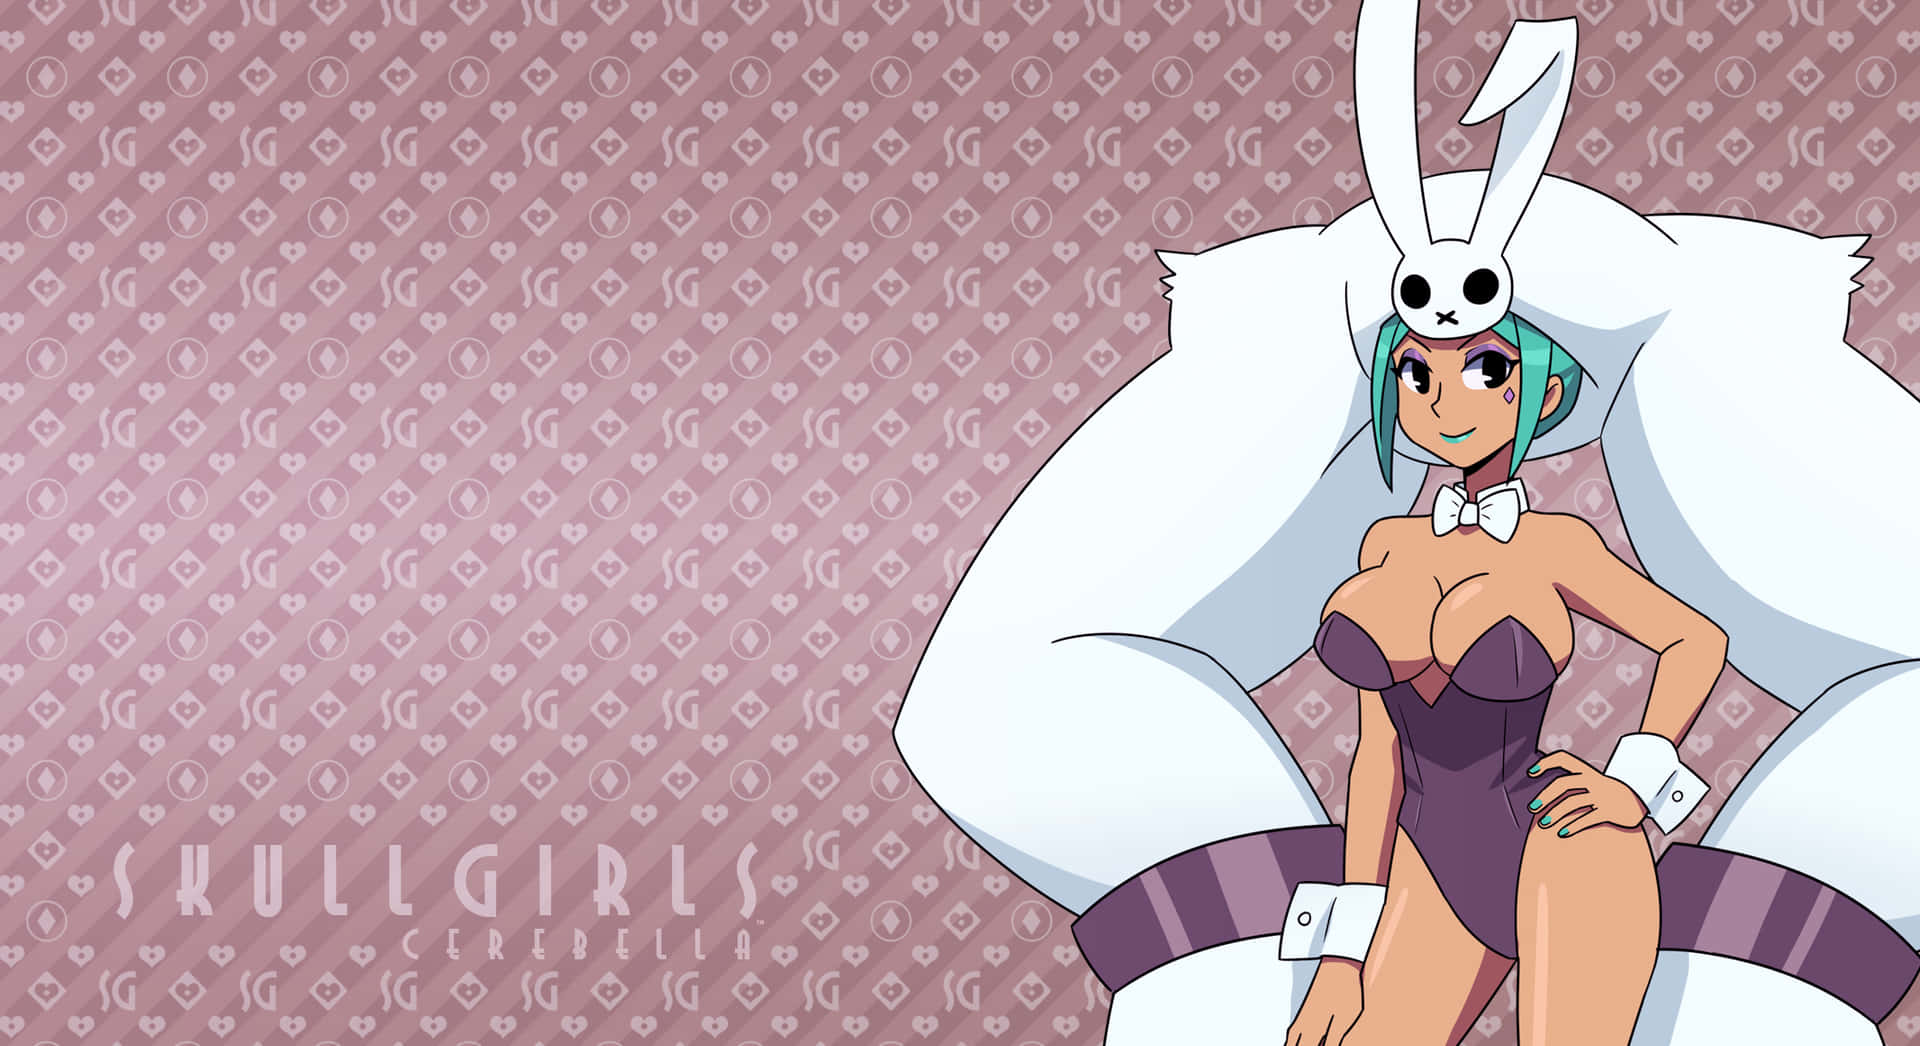 An action-packed moment from Skullgirls featuring four iconic characters Wallpaper